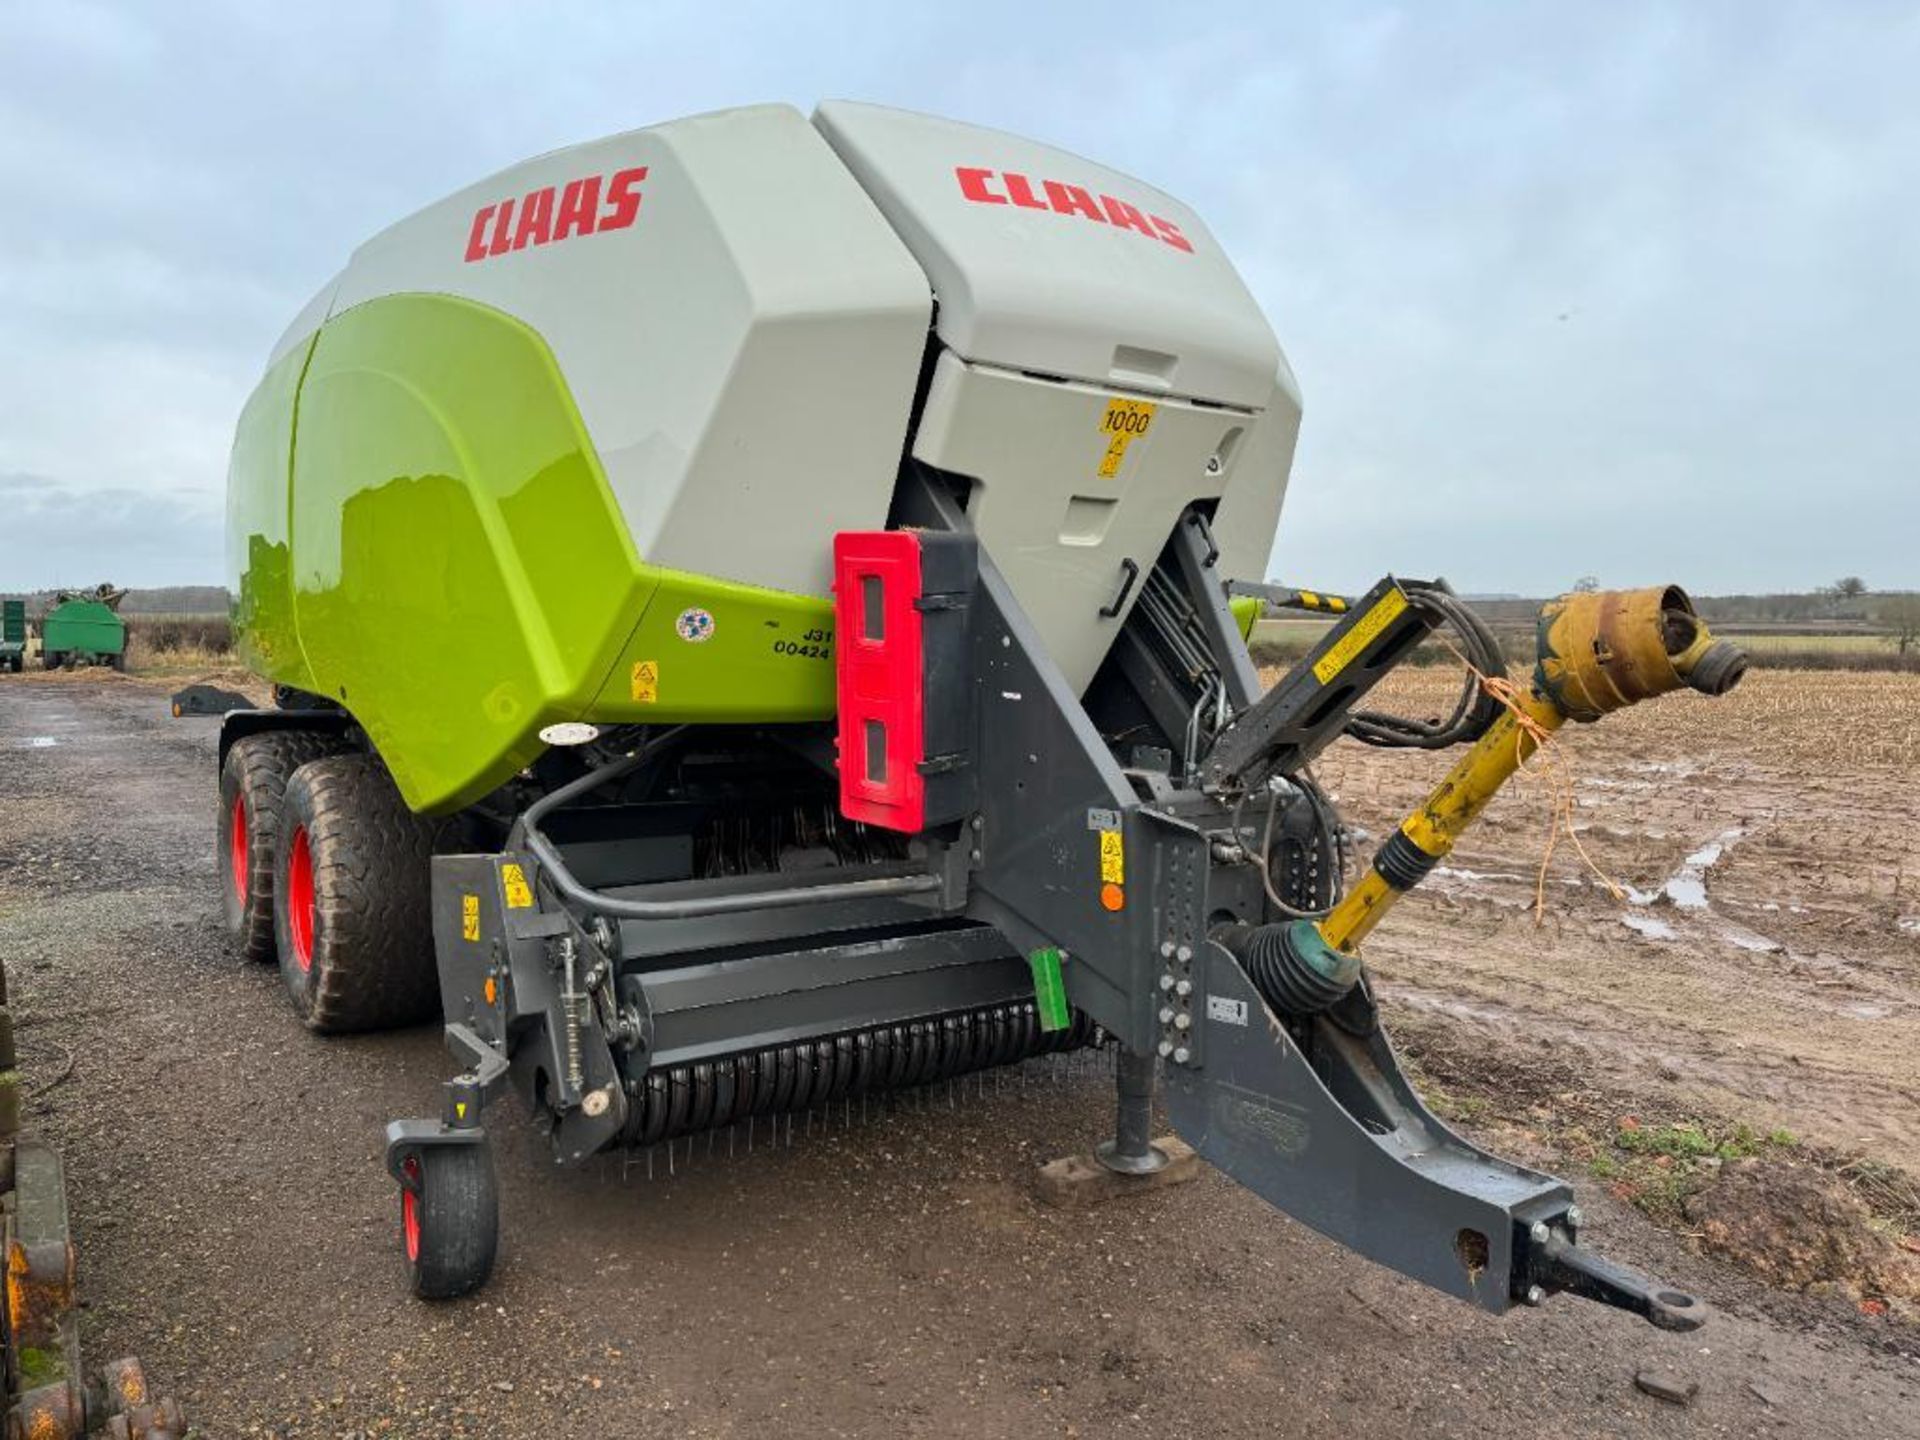 2017 Claas 5200 Quadrant 6 string twin axle baler and Claas communicator with 120x70 chamber, rotati - Image 27 of 27